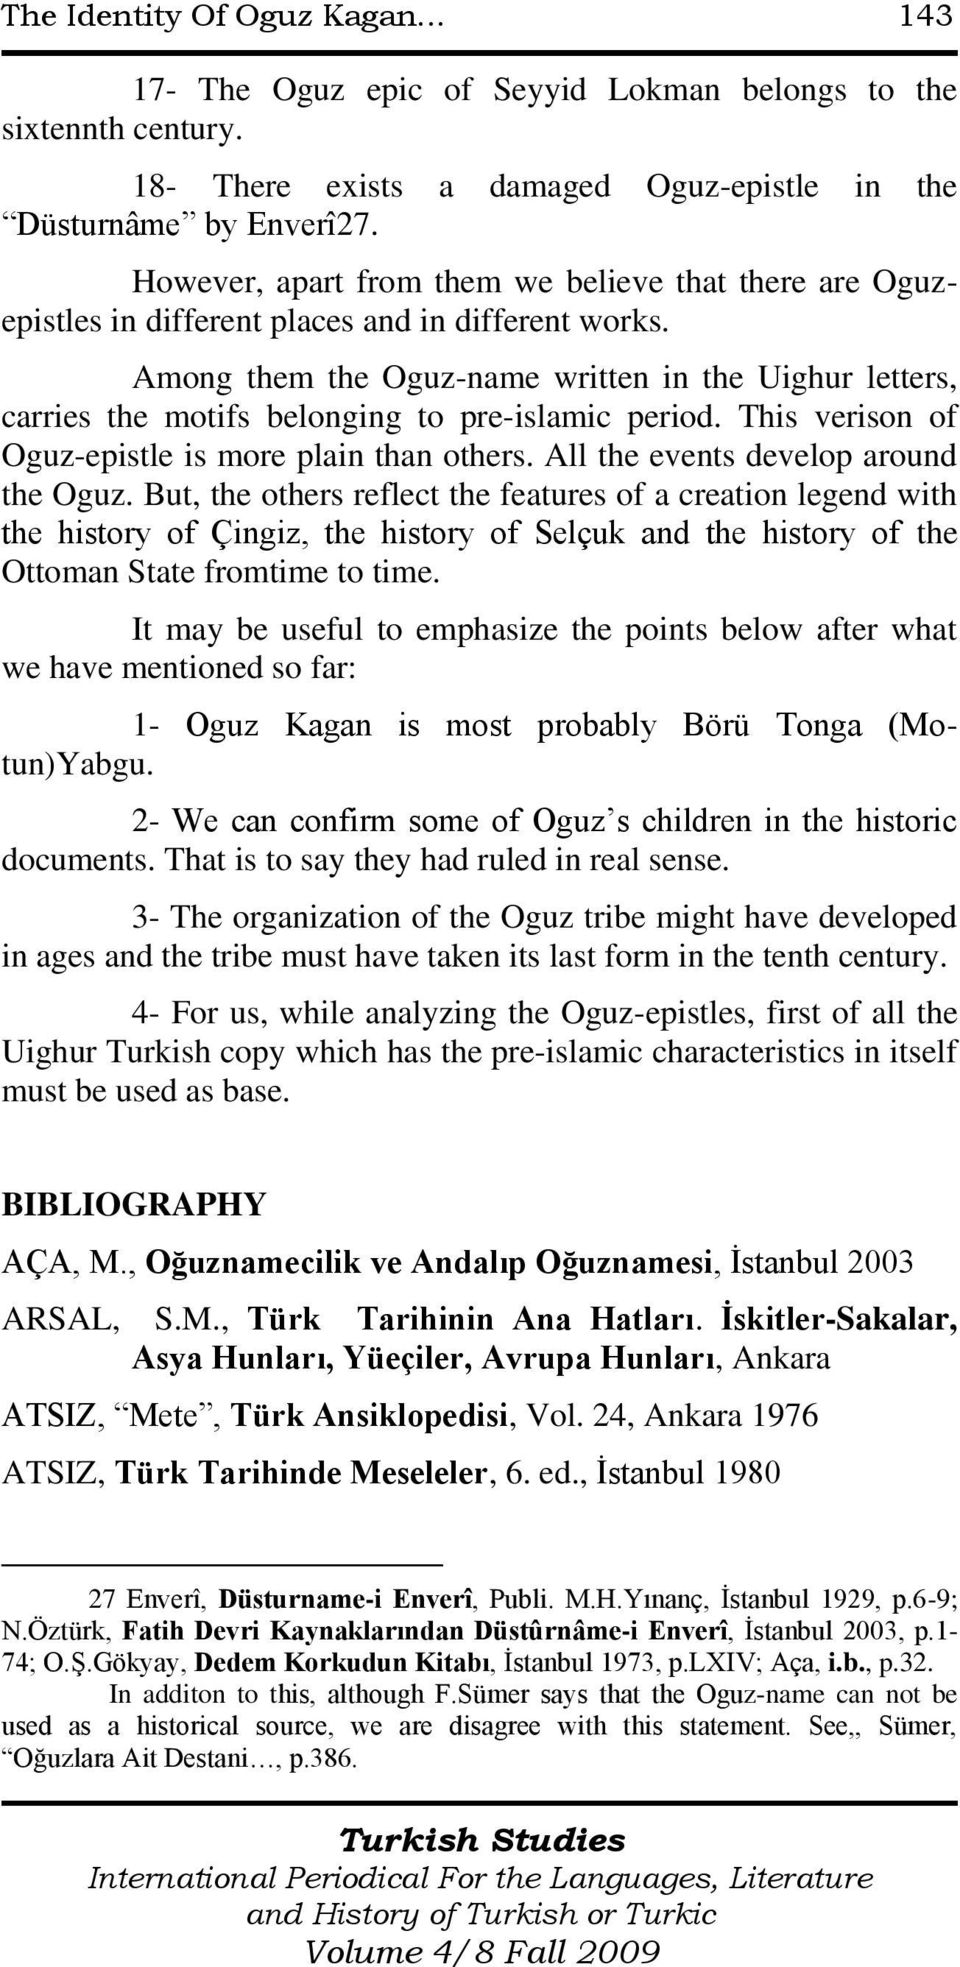 Among them the Oguz-name written in the Uighur letters, carries the motifs belonging to pre-islamic period. This verison of Oguz-epistle is more plain than others.